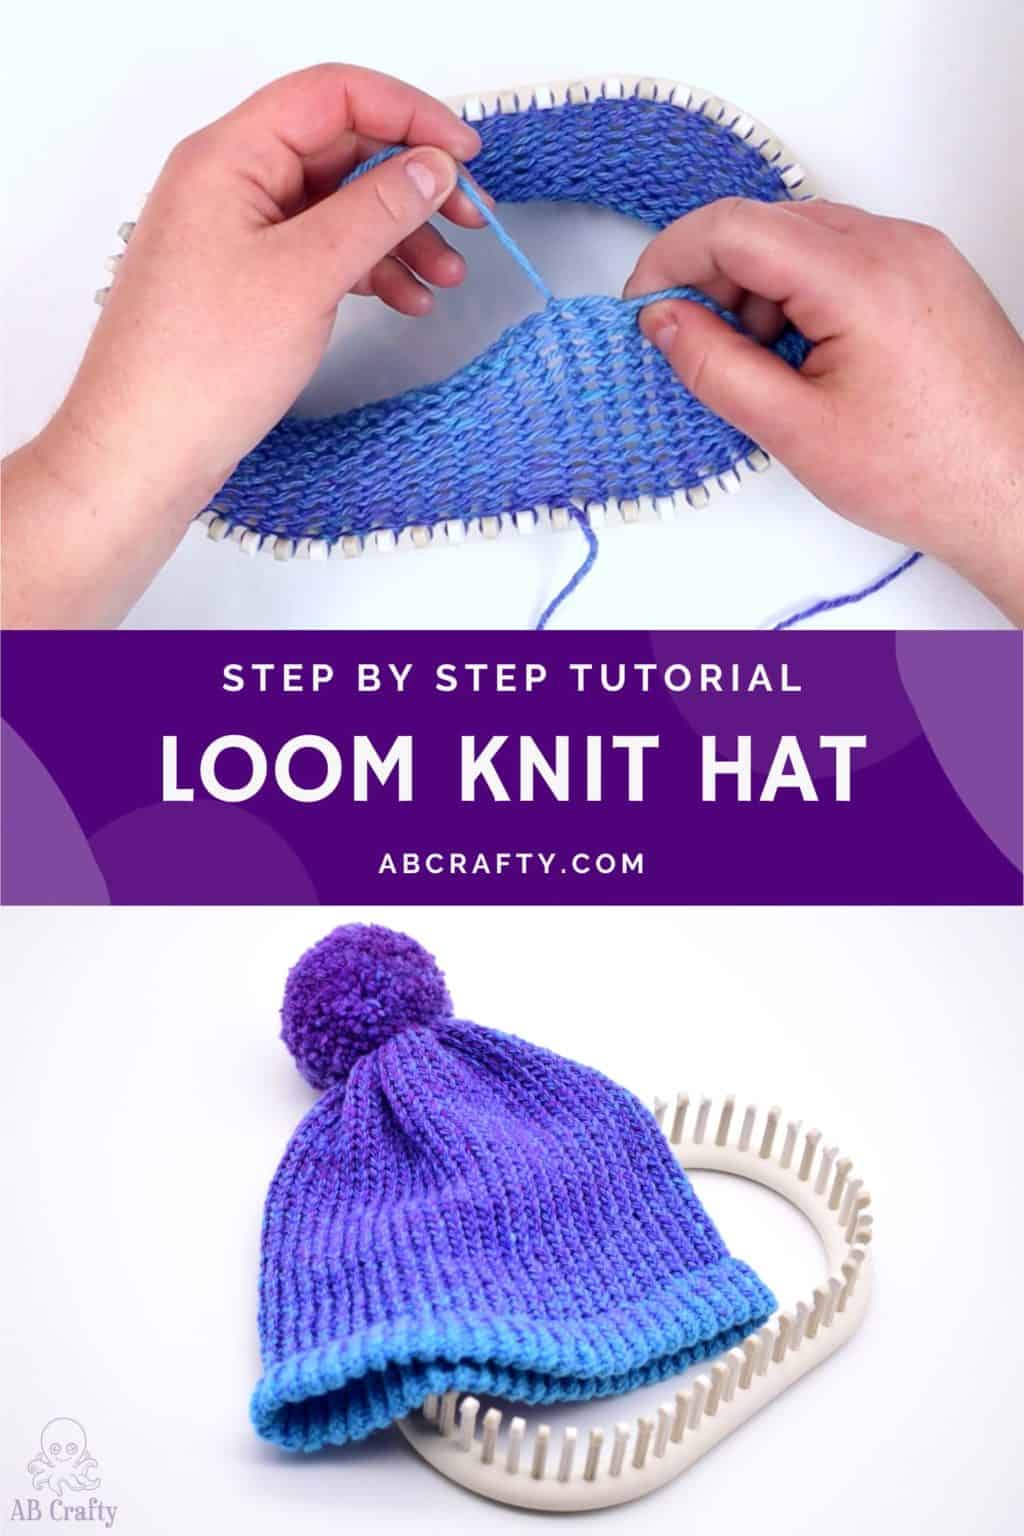 top image is showing the first 10 rows of the knitting on the loom and the bottom image shows the finished knitting loom beanie. the title reads "step by step tutorial - loom knit hat, abcrafty.com"